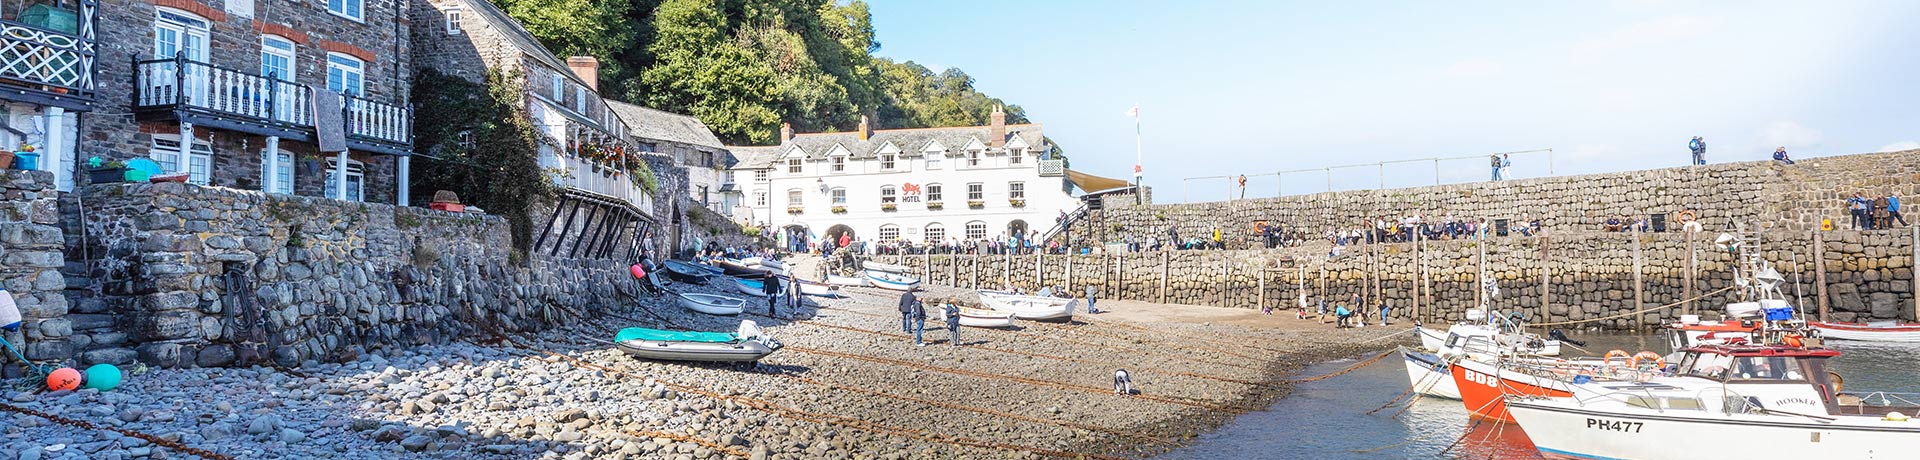 Places to eat in North Devon